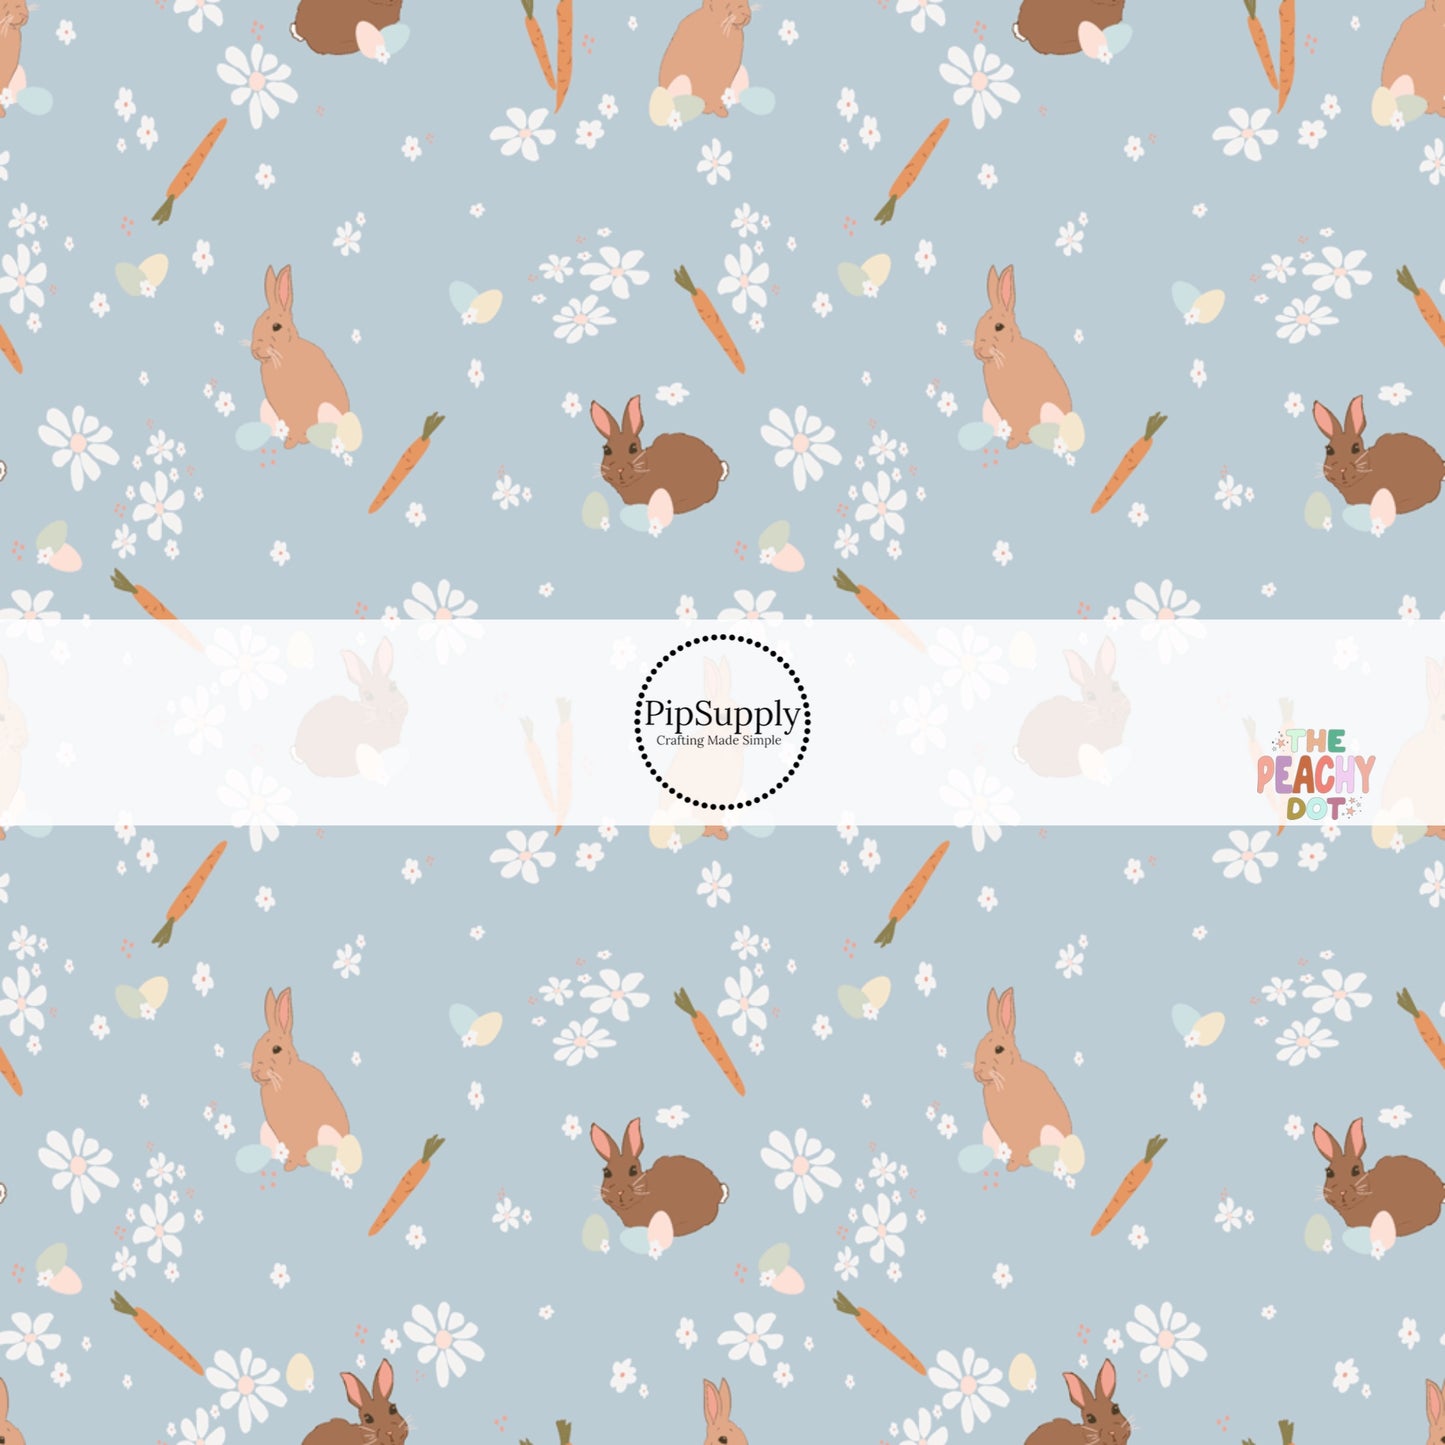 Orange carrots, white flowers, brown bunnies, colorful eggs on blue bow strips